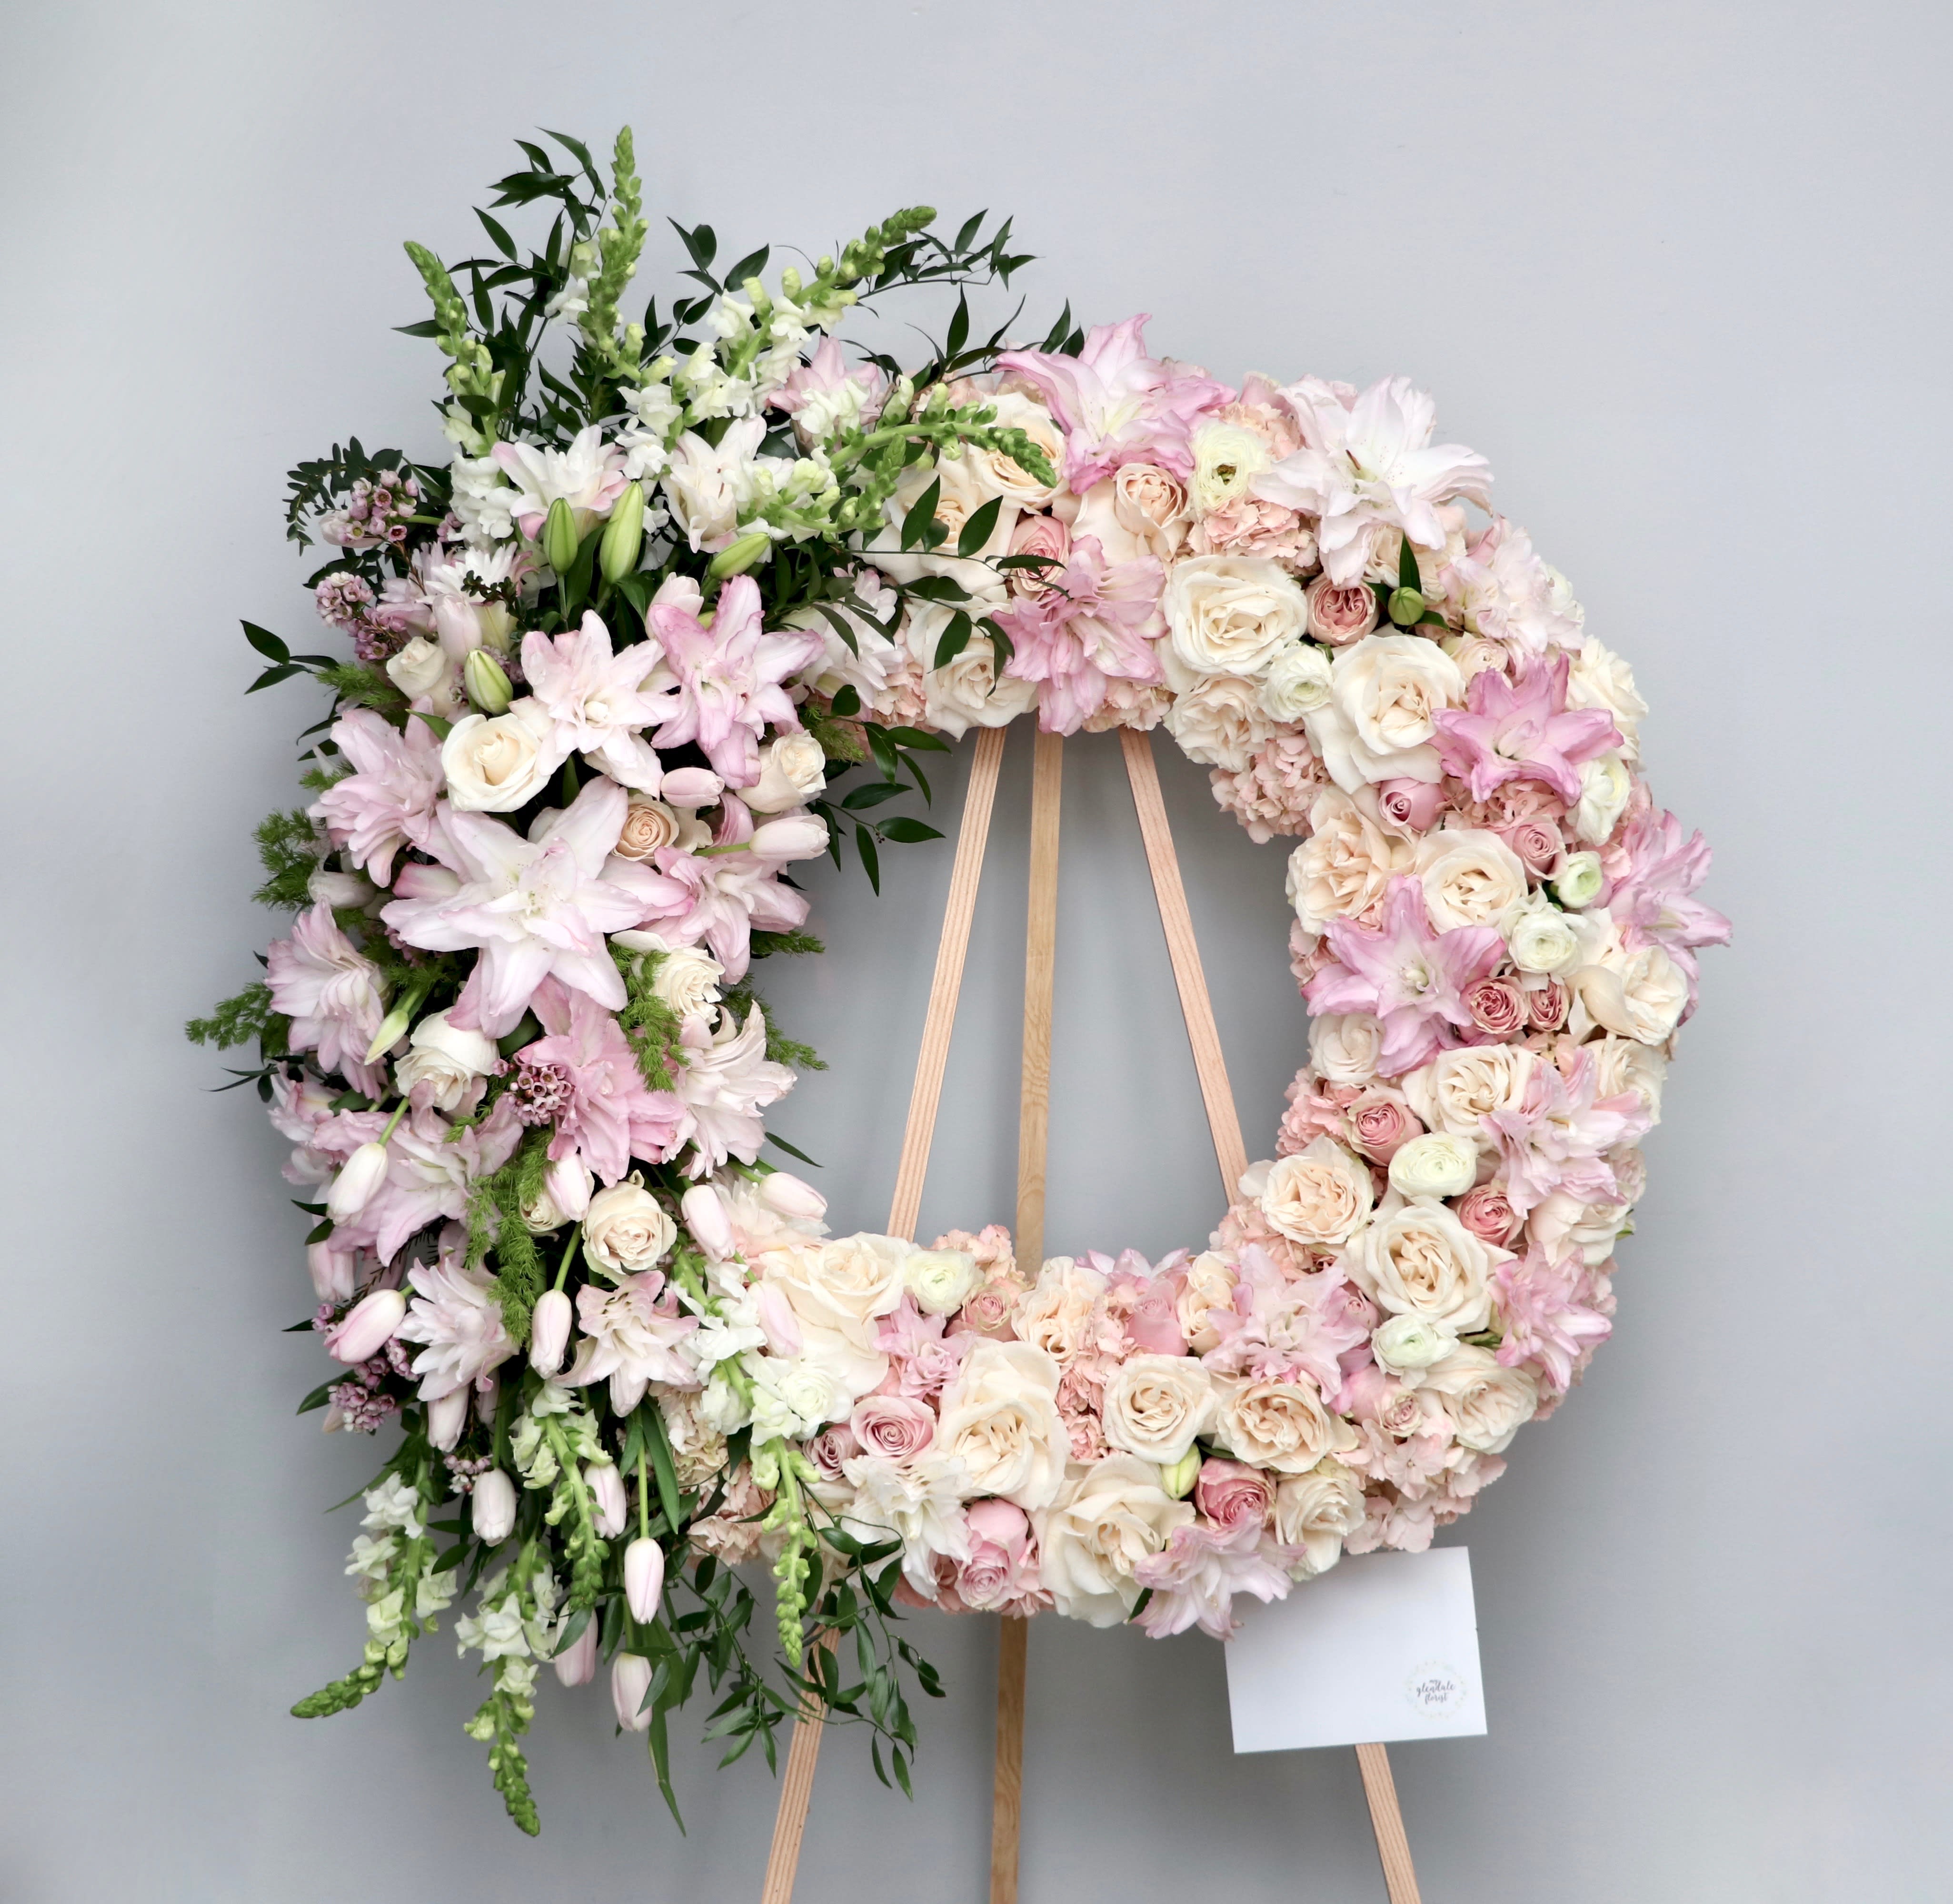 Blushy Wreath  - Blush colored florals to fill this wreath.  We include easel, printed banner and delivery (some fees may apply).  Standard size is 30'', deluxe is 36'', and premium is 42''.